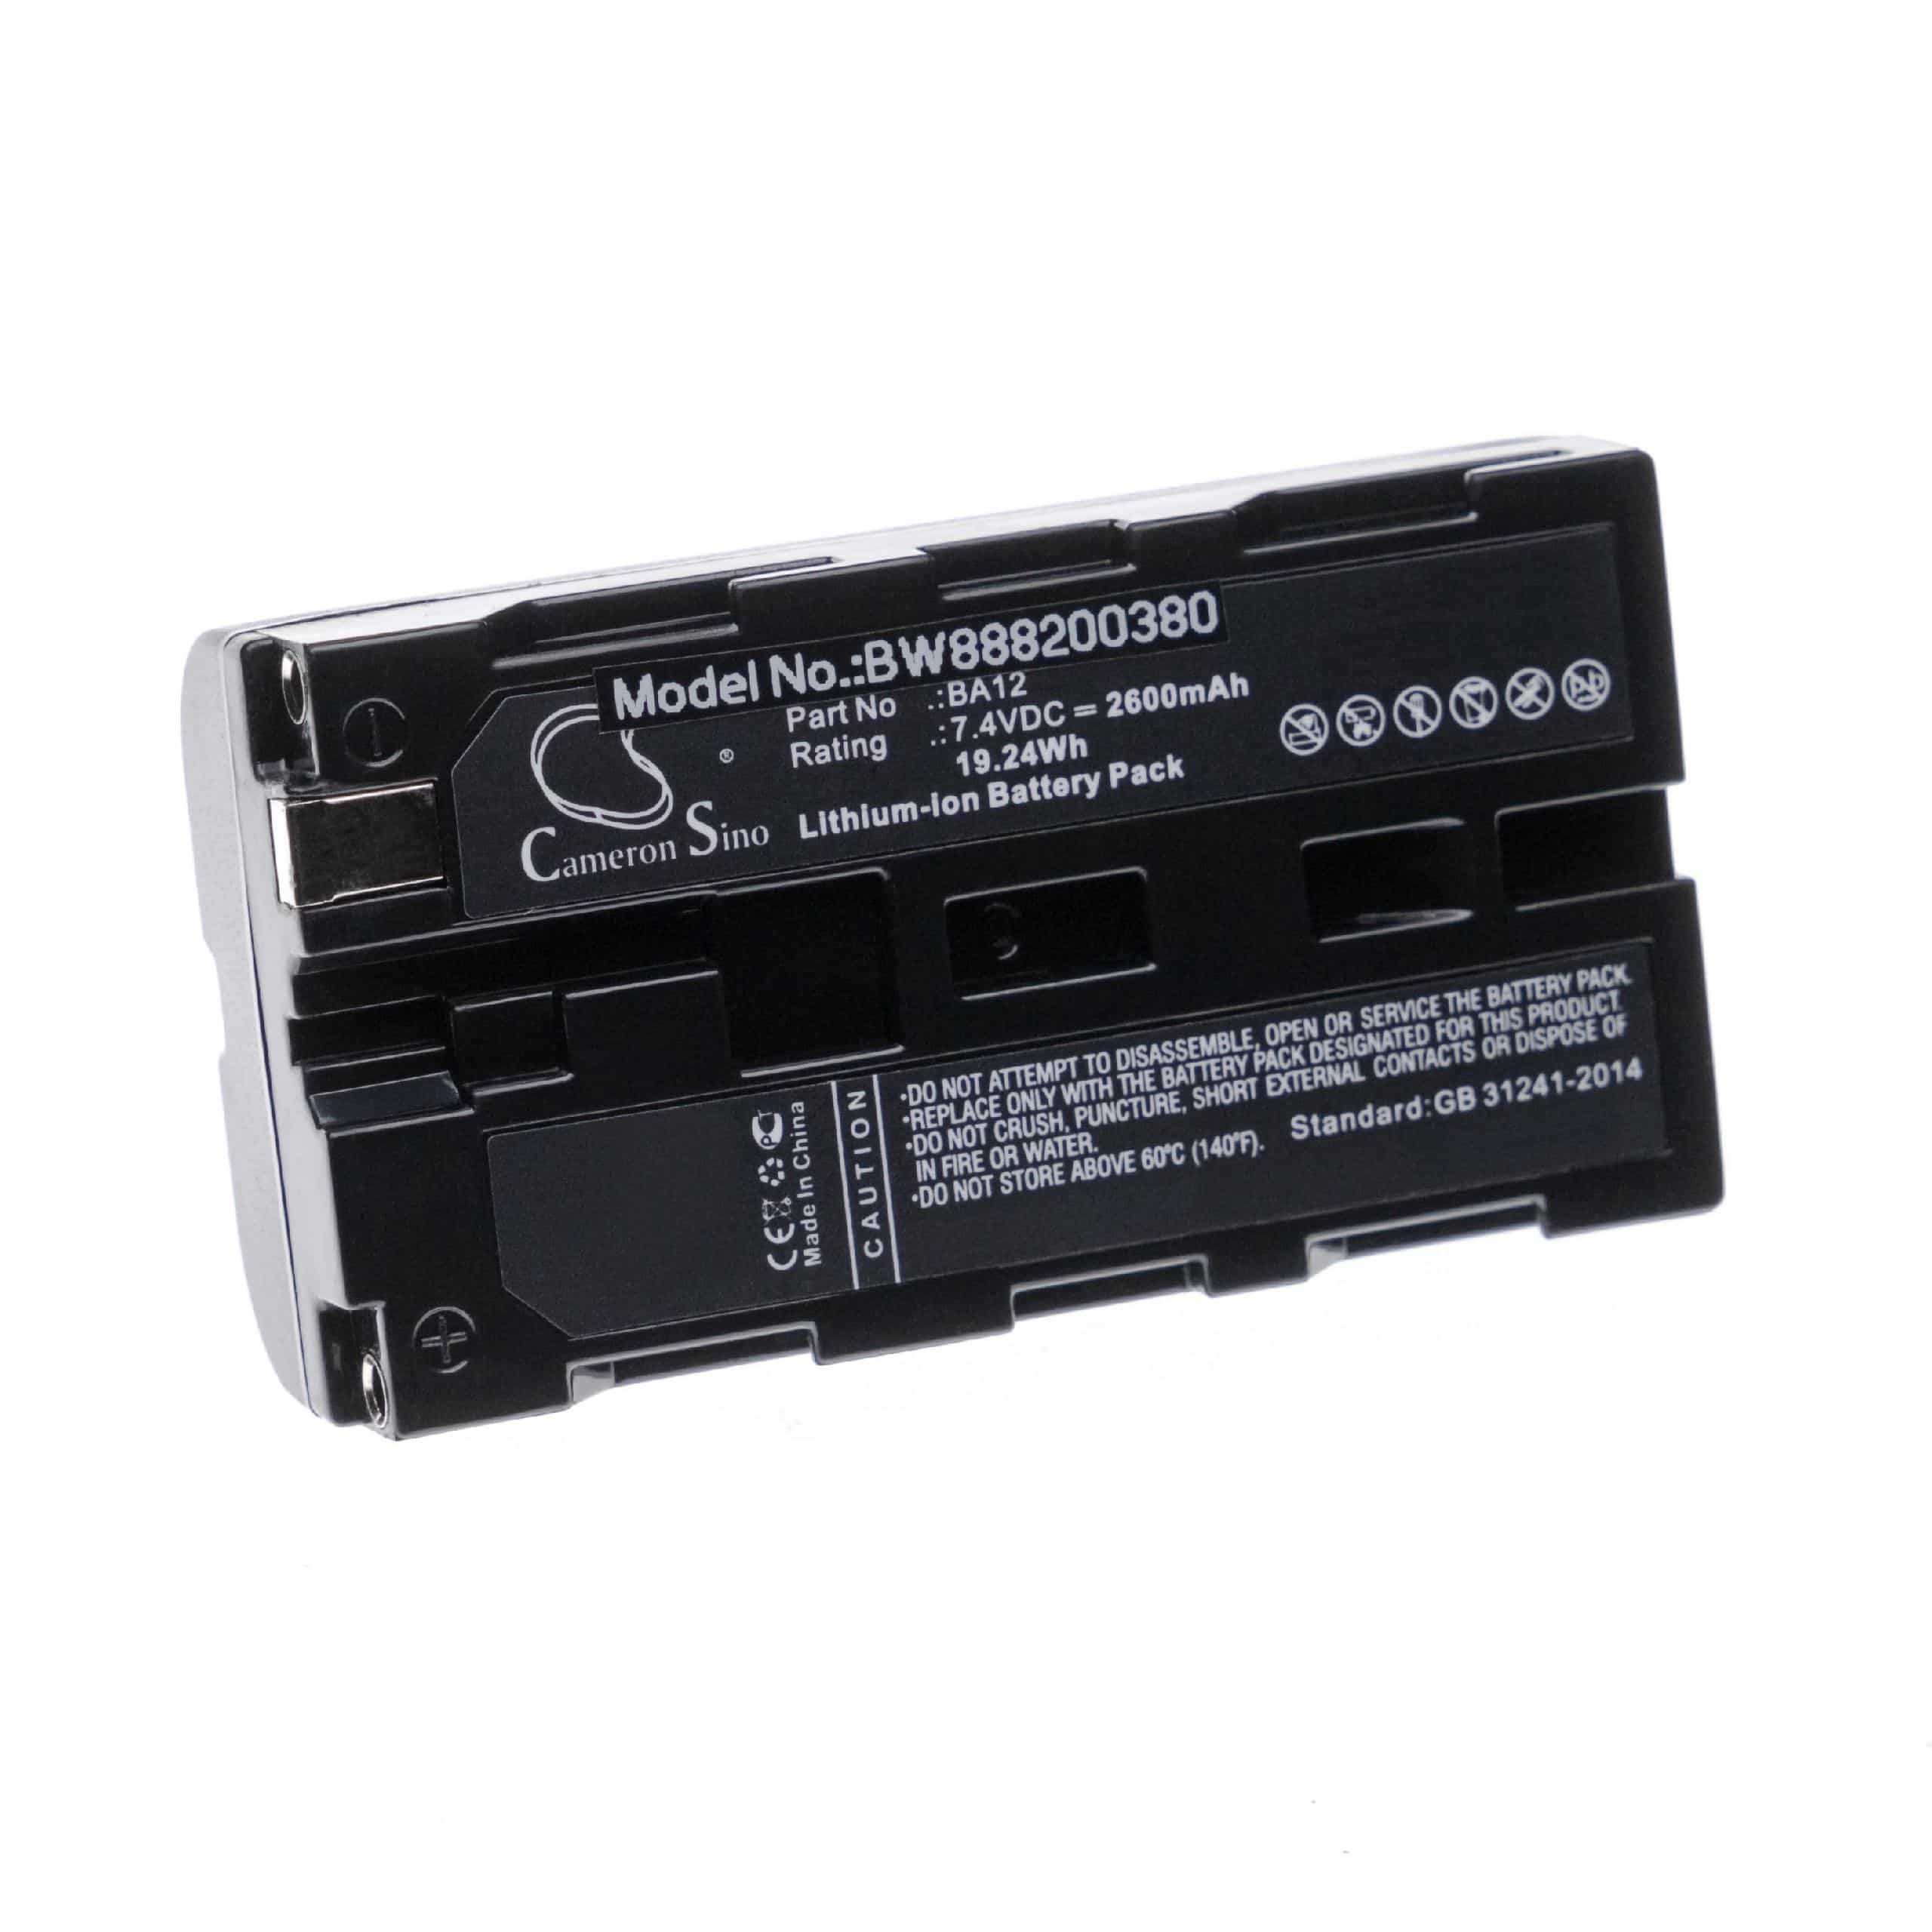 Electric Guitar Battery Replacement for Line 6 BA12, 98-034-0003 - 2600mAh 7.4V Li-Ion